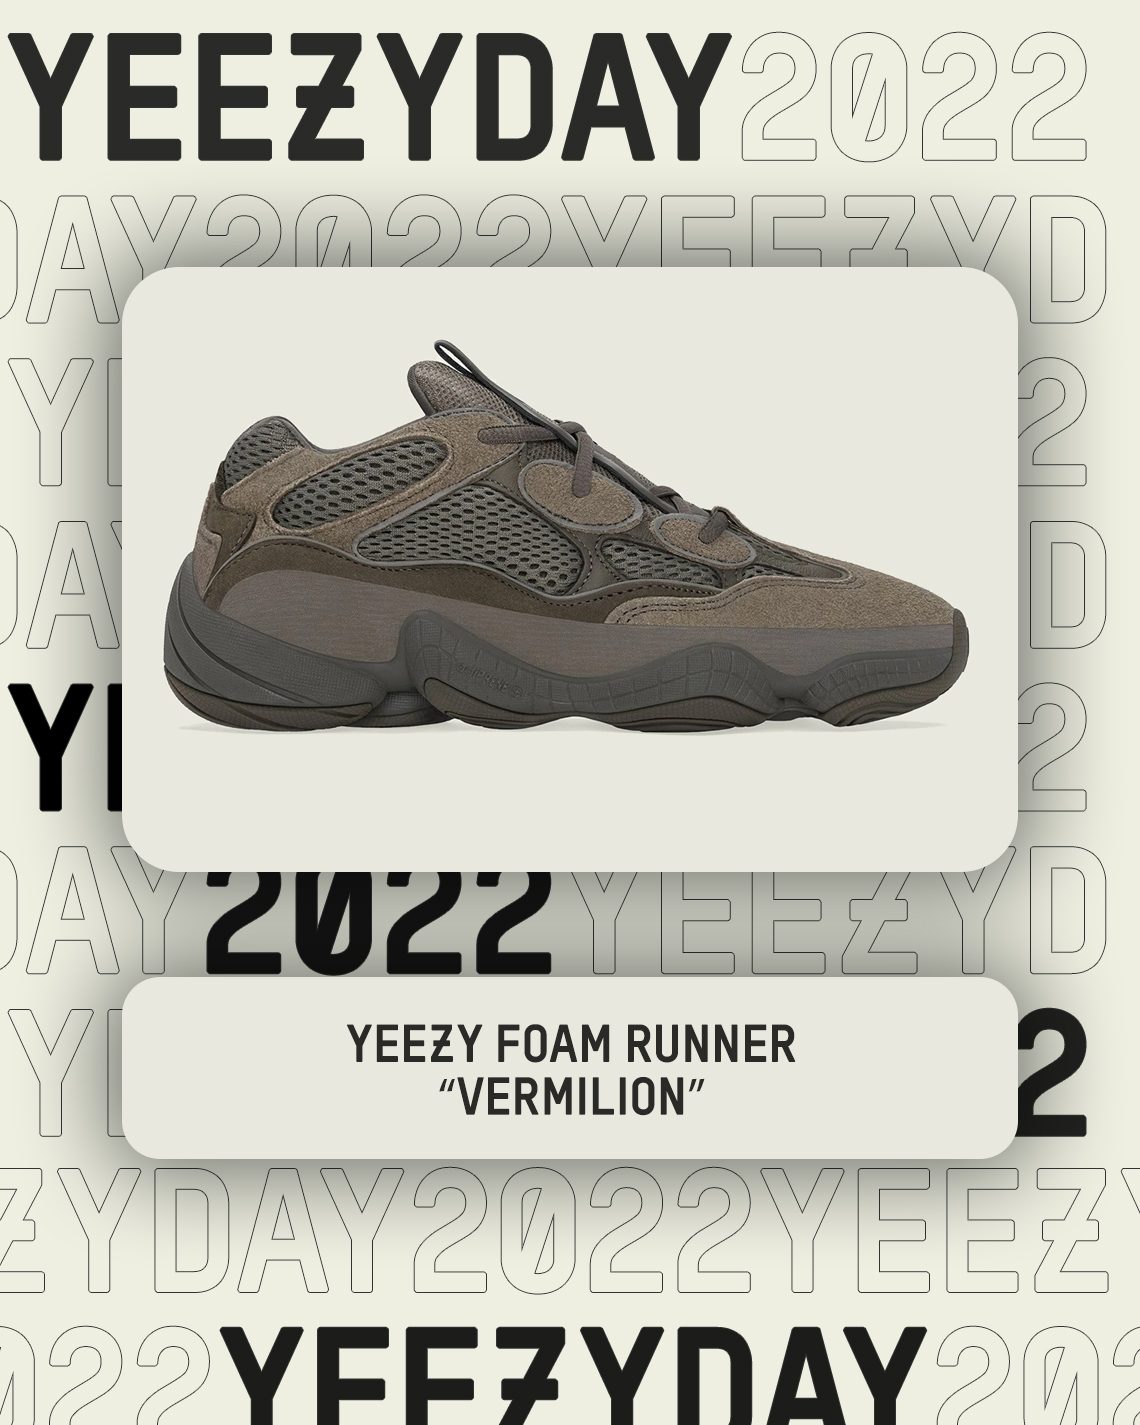 YEEZY yeezy da nike DAY 2022 Releases – August 2nd & 3rd | SneakerNews.com